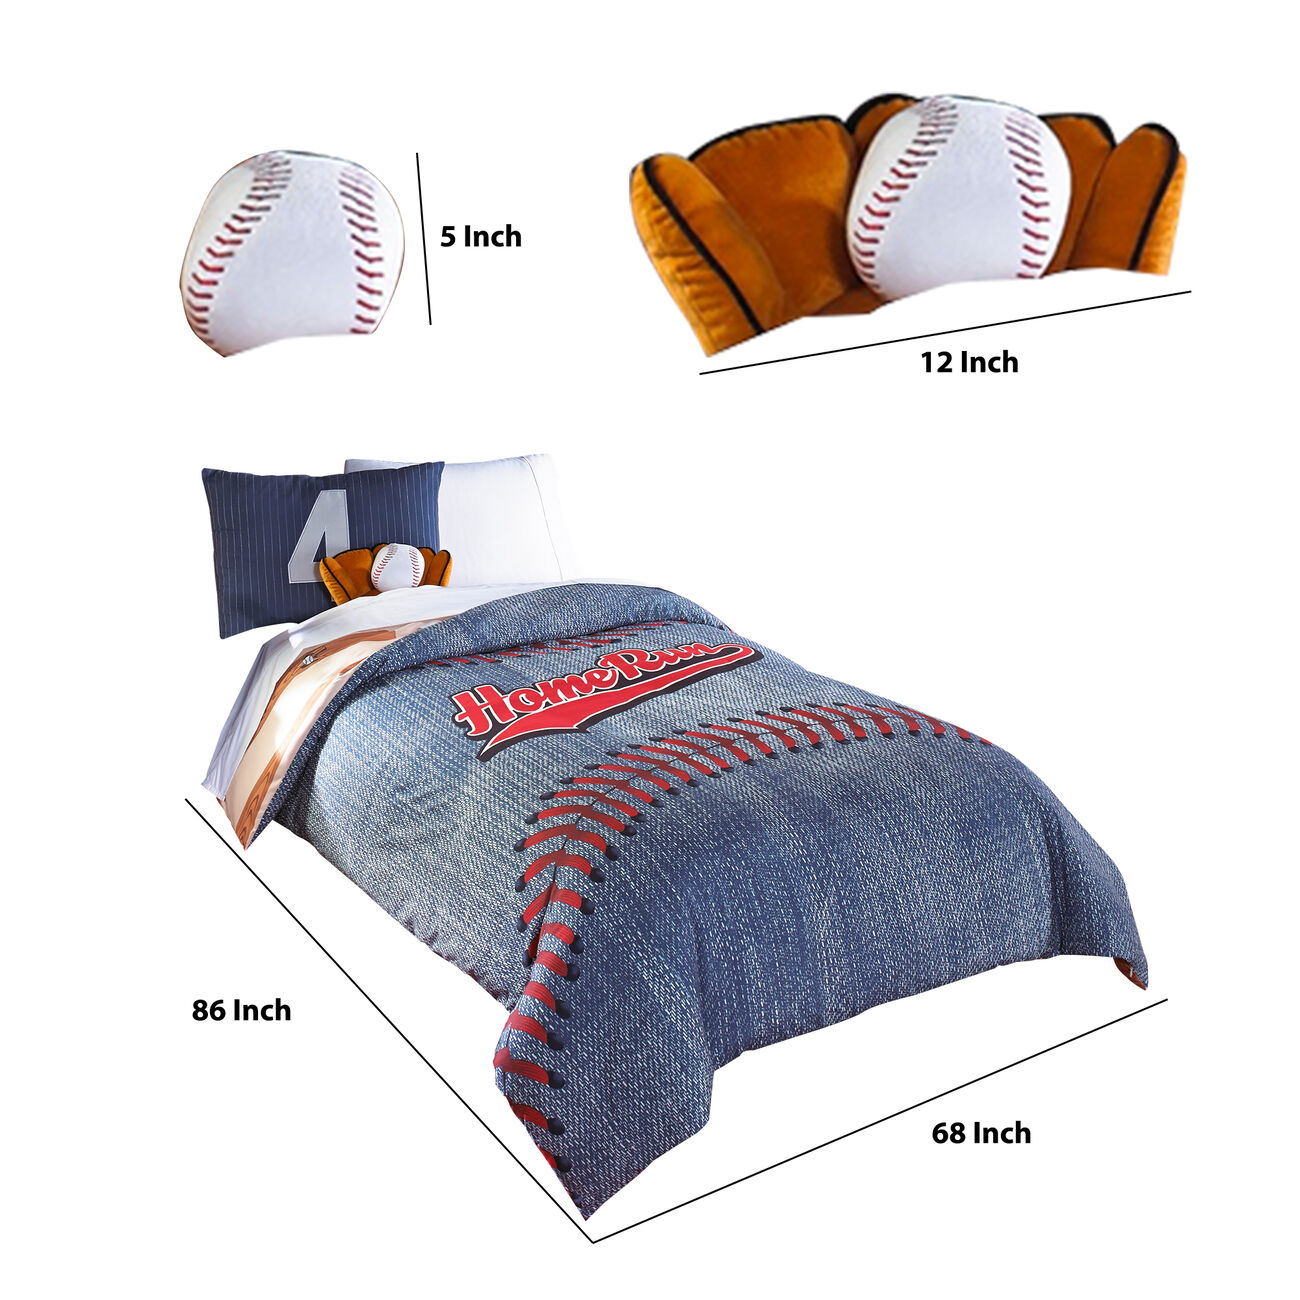 5 Piece Polyester Twin Comforter Set with Baseball Inspired Print, Blue